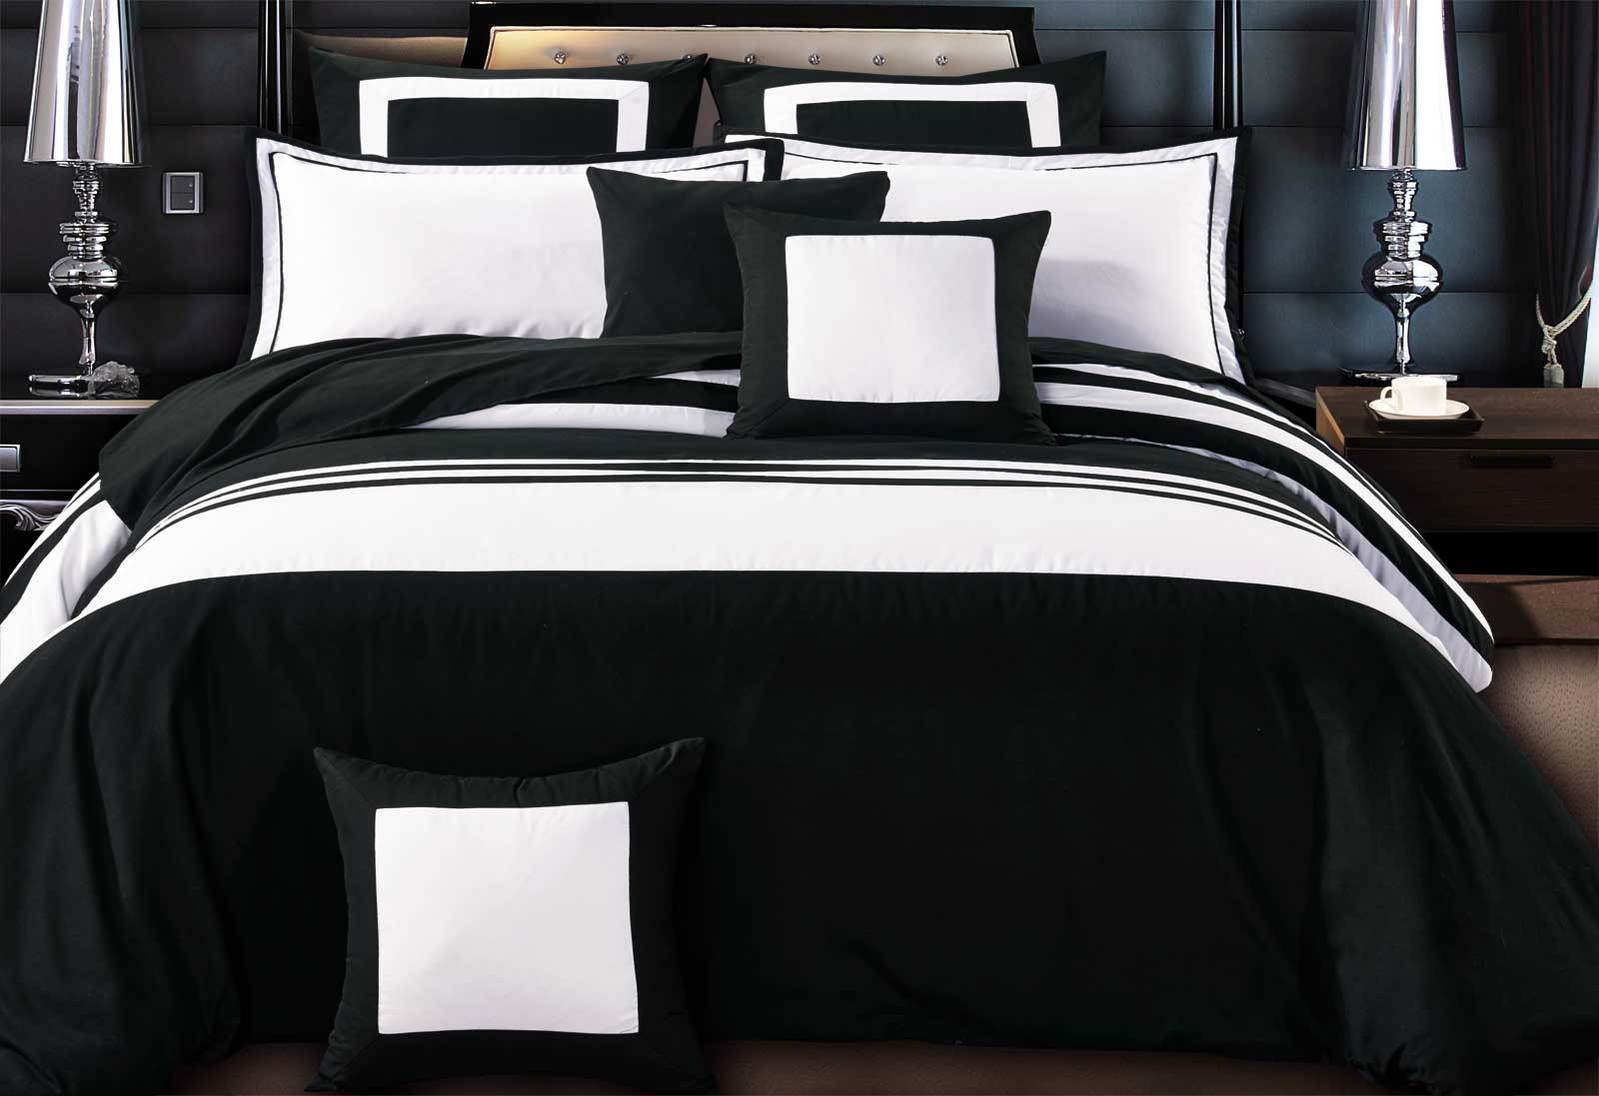 Luxton Rossier 3pcs Black White Striped Quilt Cover Set / optionals( Queen / King / Super King / other options)